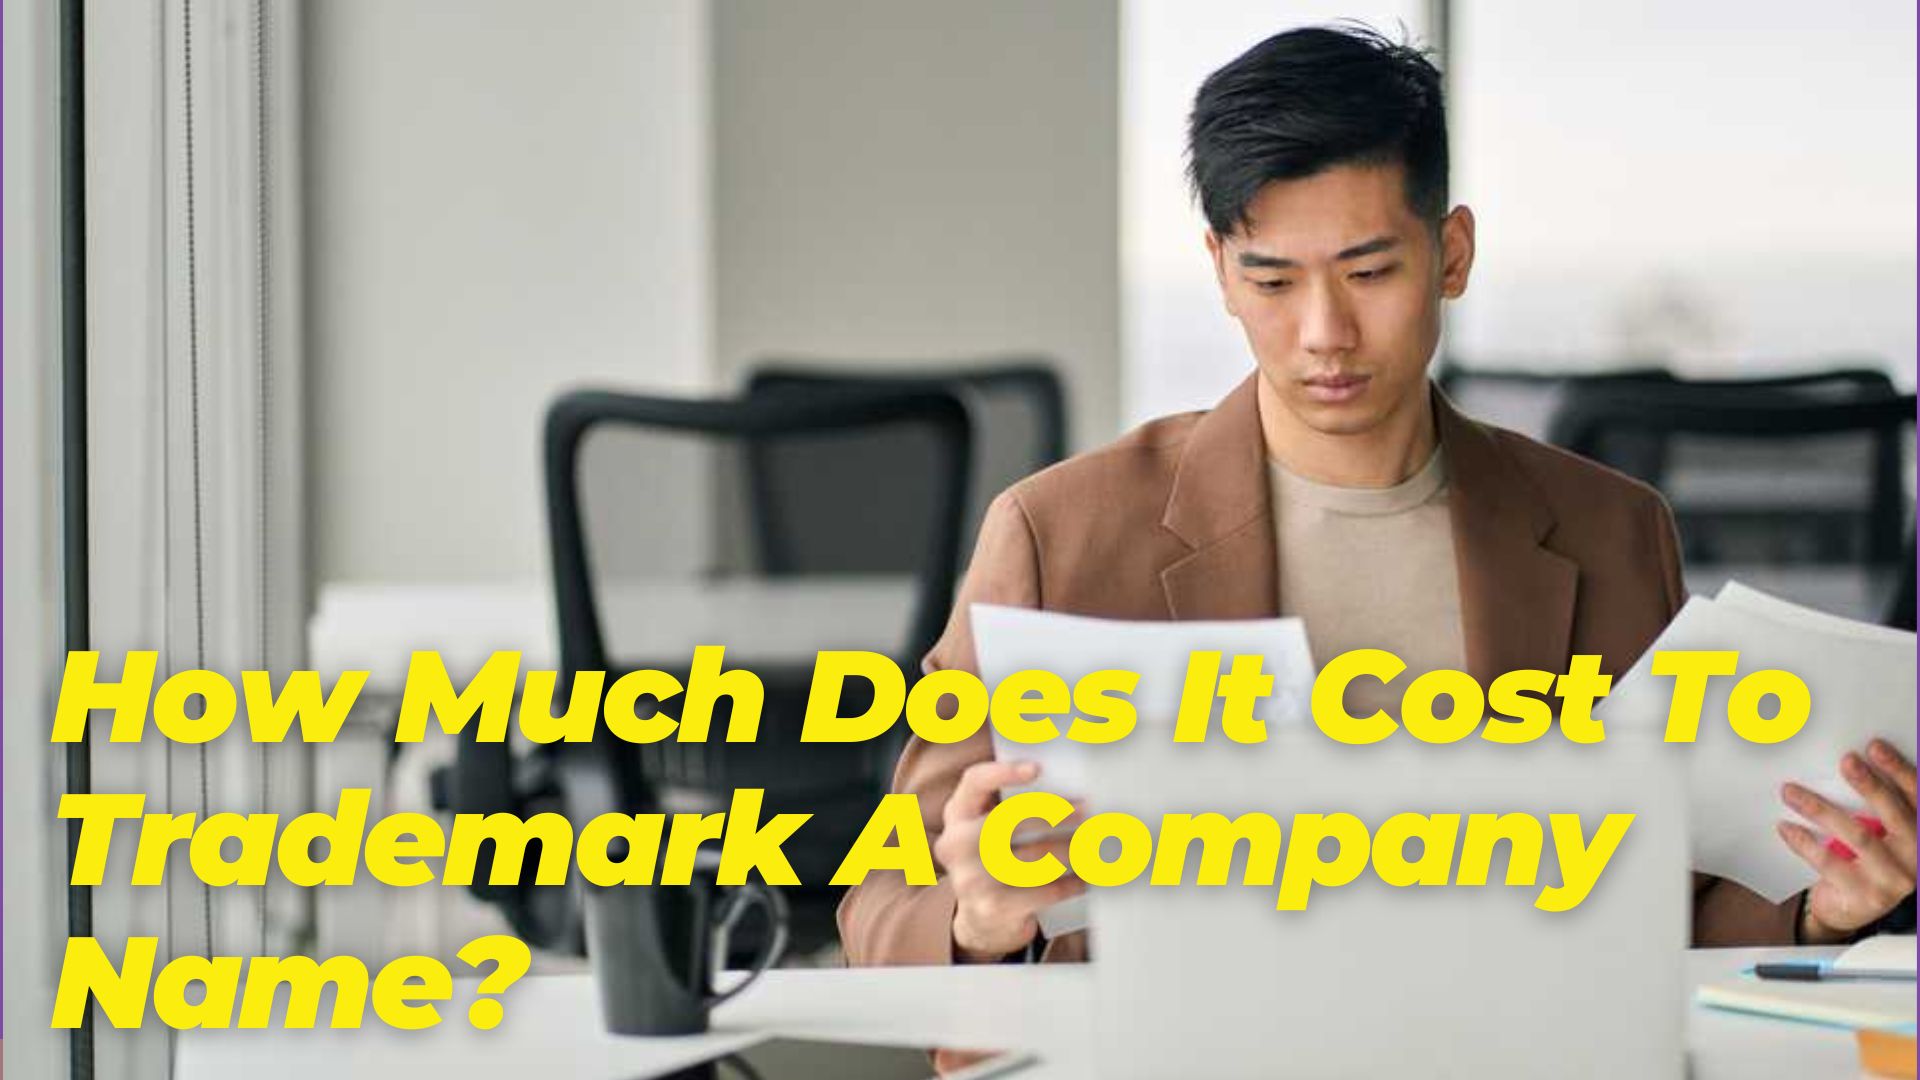 How Much Does It Cost To Trademark A Company Name?